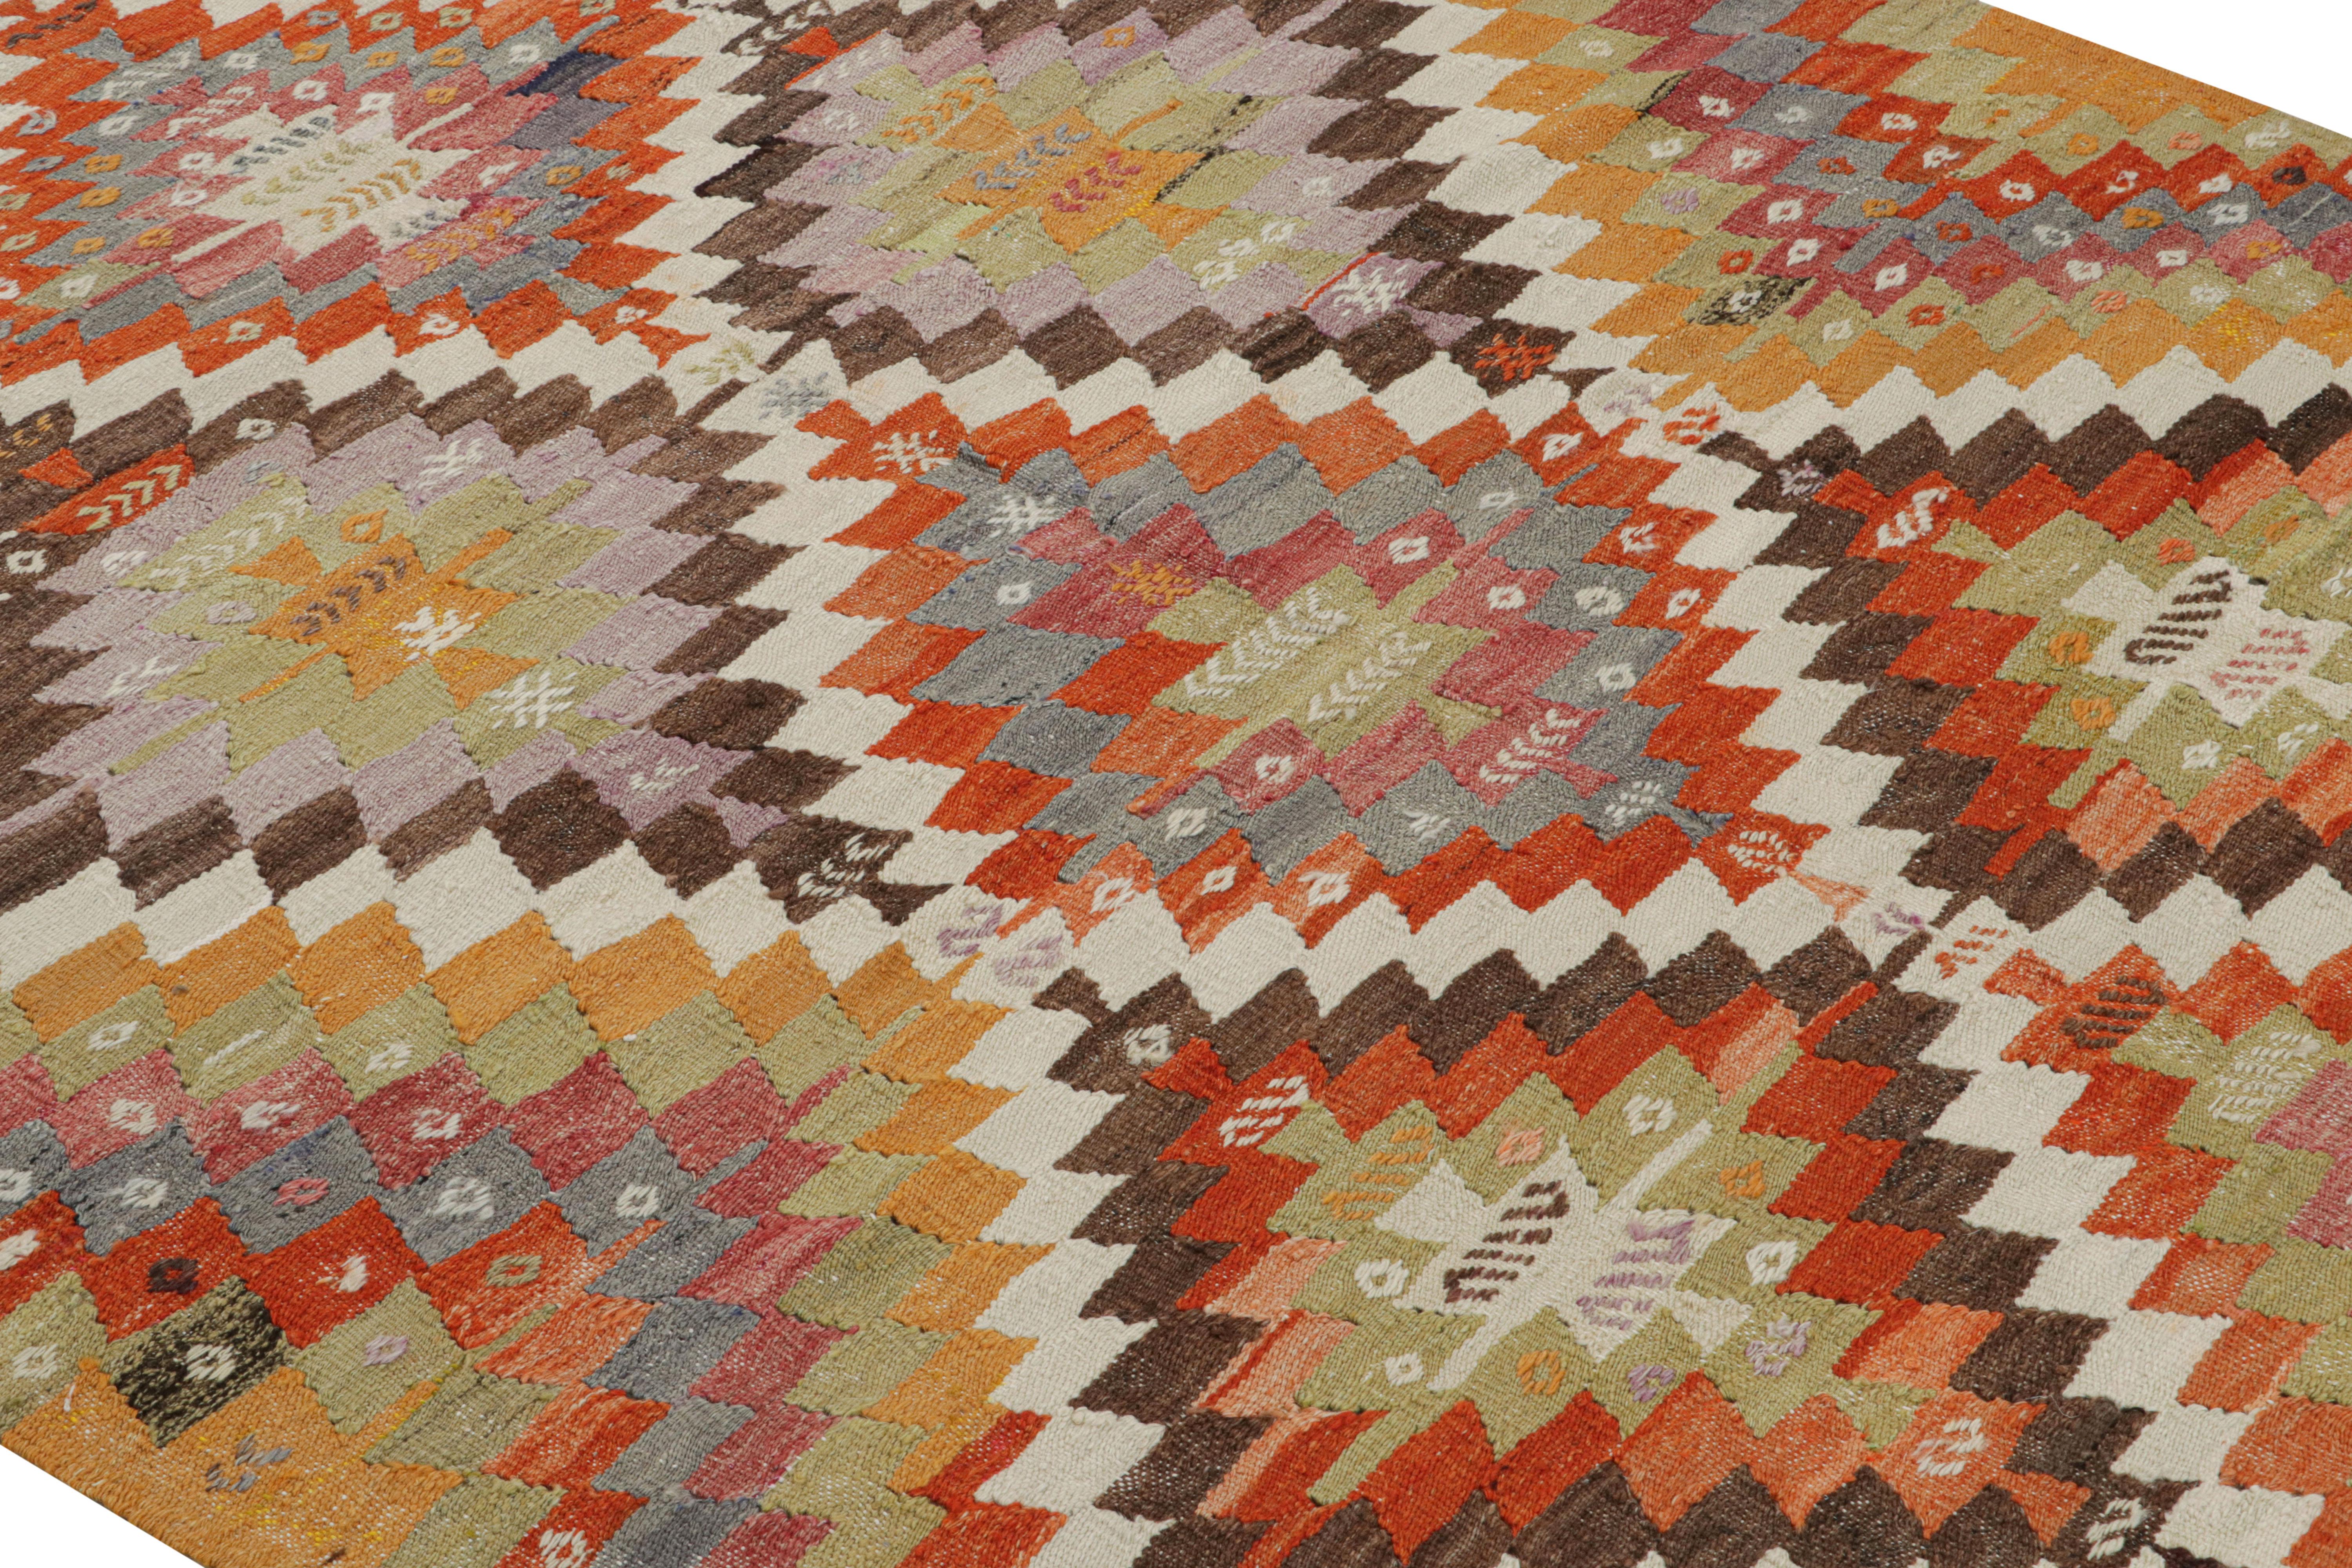 Flat-woven in Turkey originating between 1950-1960, this vintage midcentury tribal Kilim hails from the city of Denizli, and enjoys a lively and playful variation of golden-yellow, orange, green, red, brown, purple, blue and light green hues